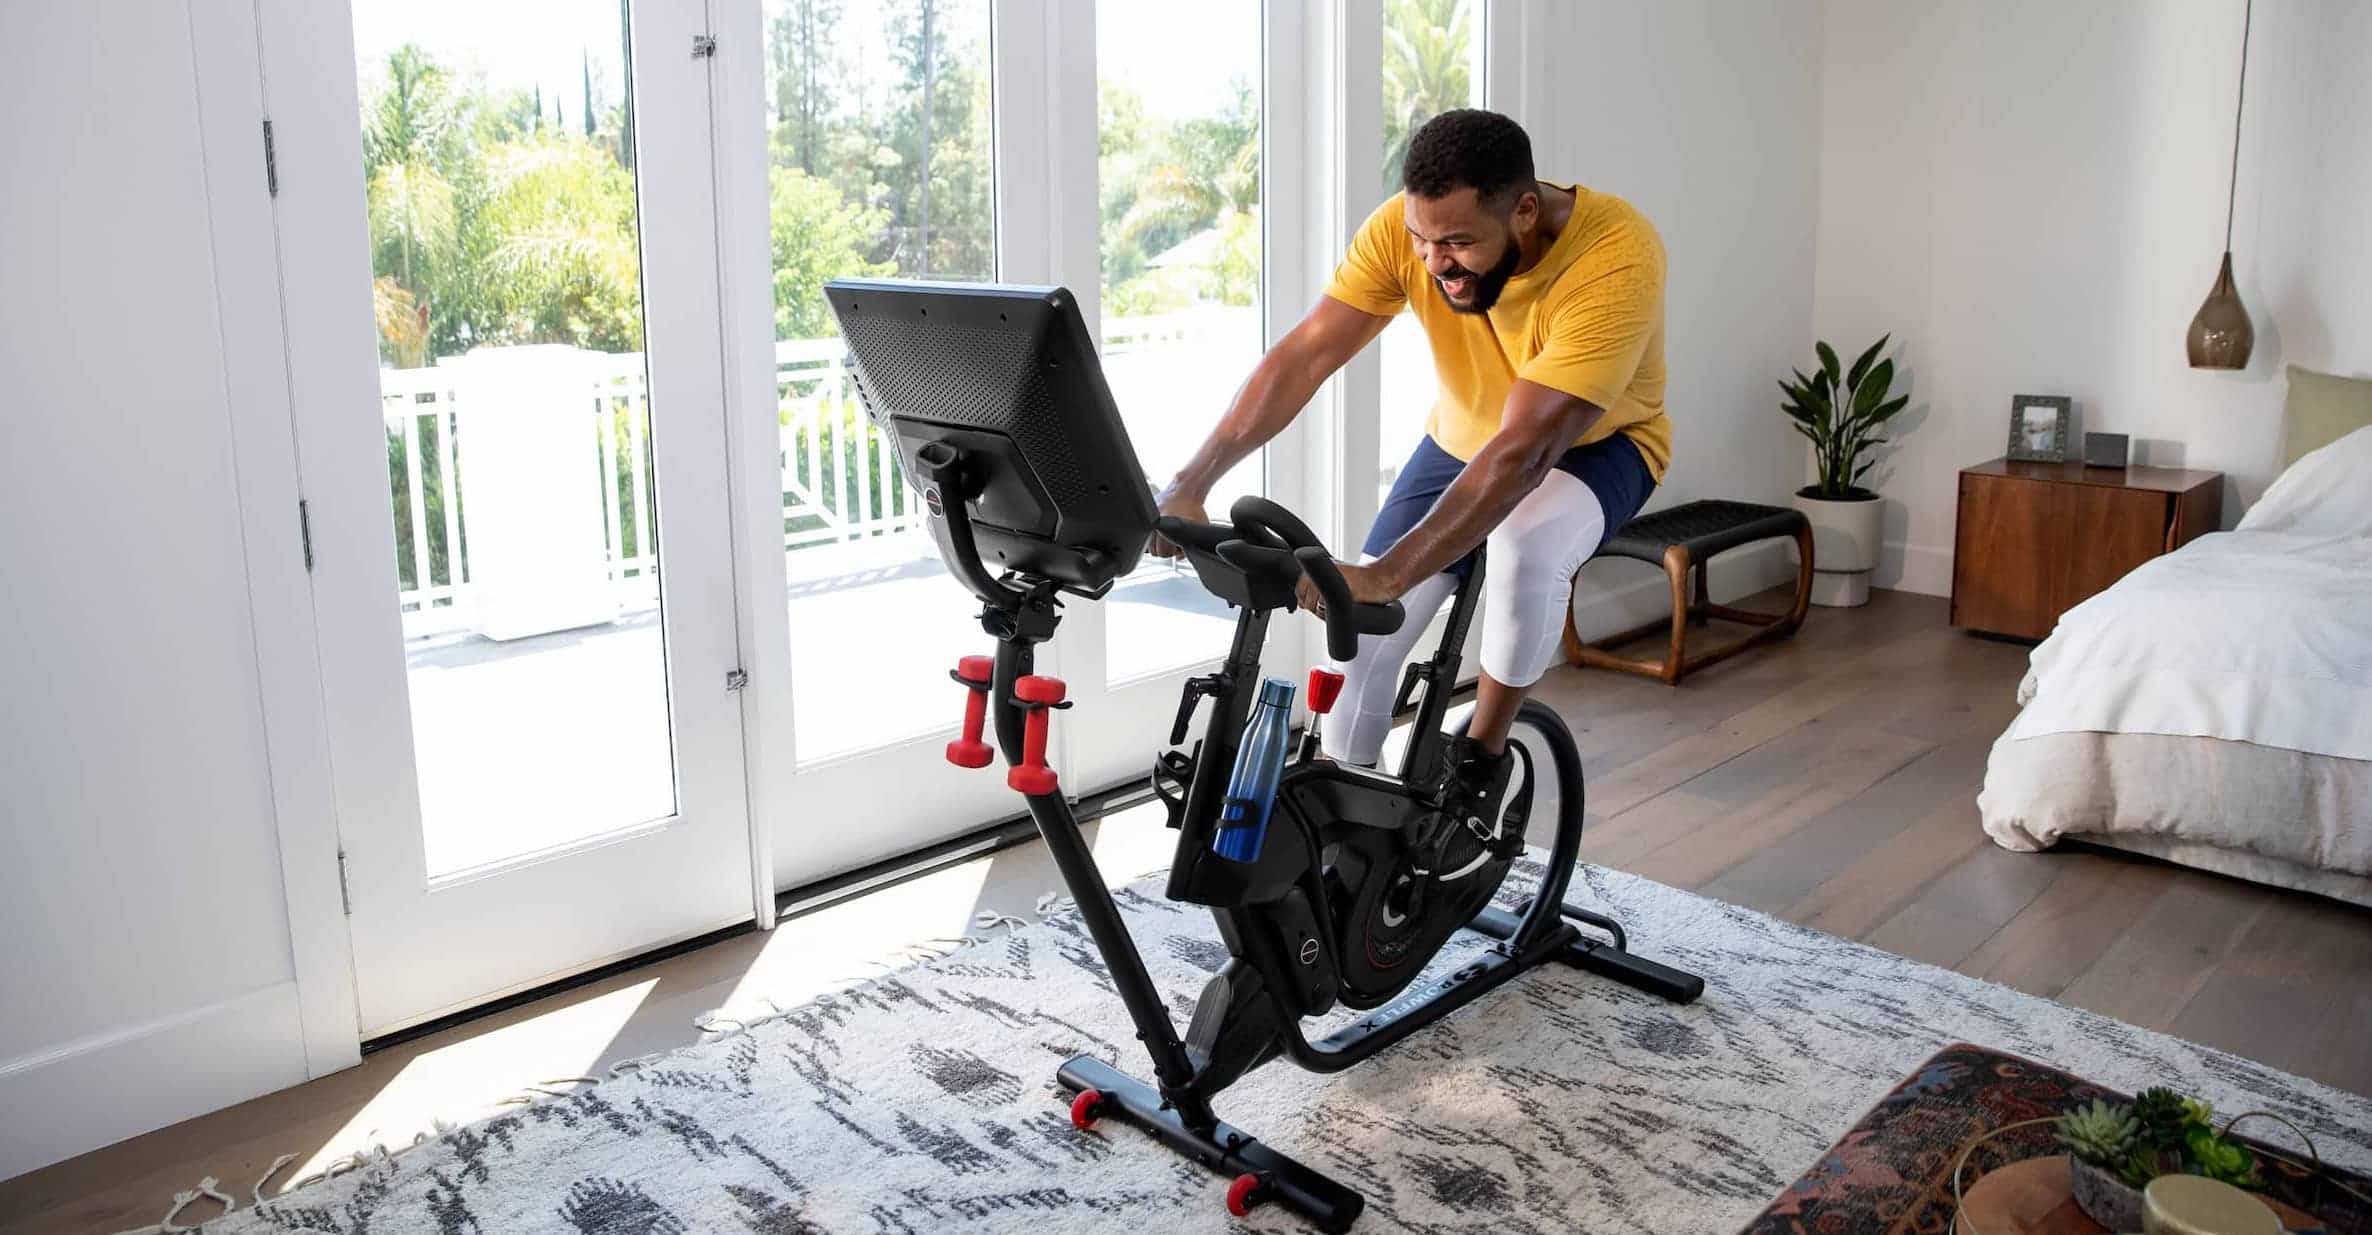 The exercise bike that leans